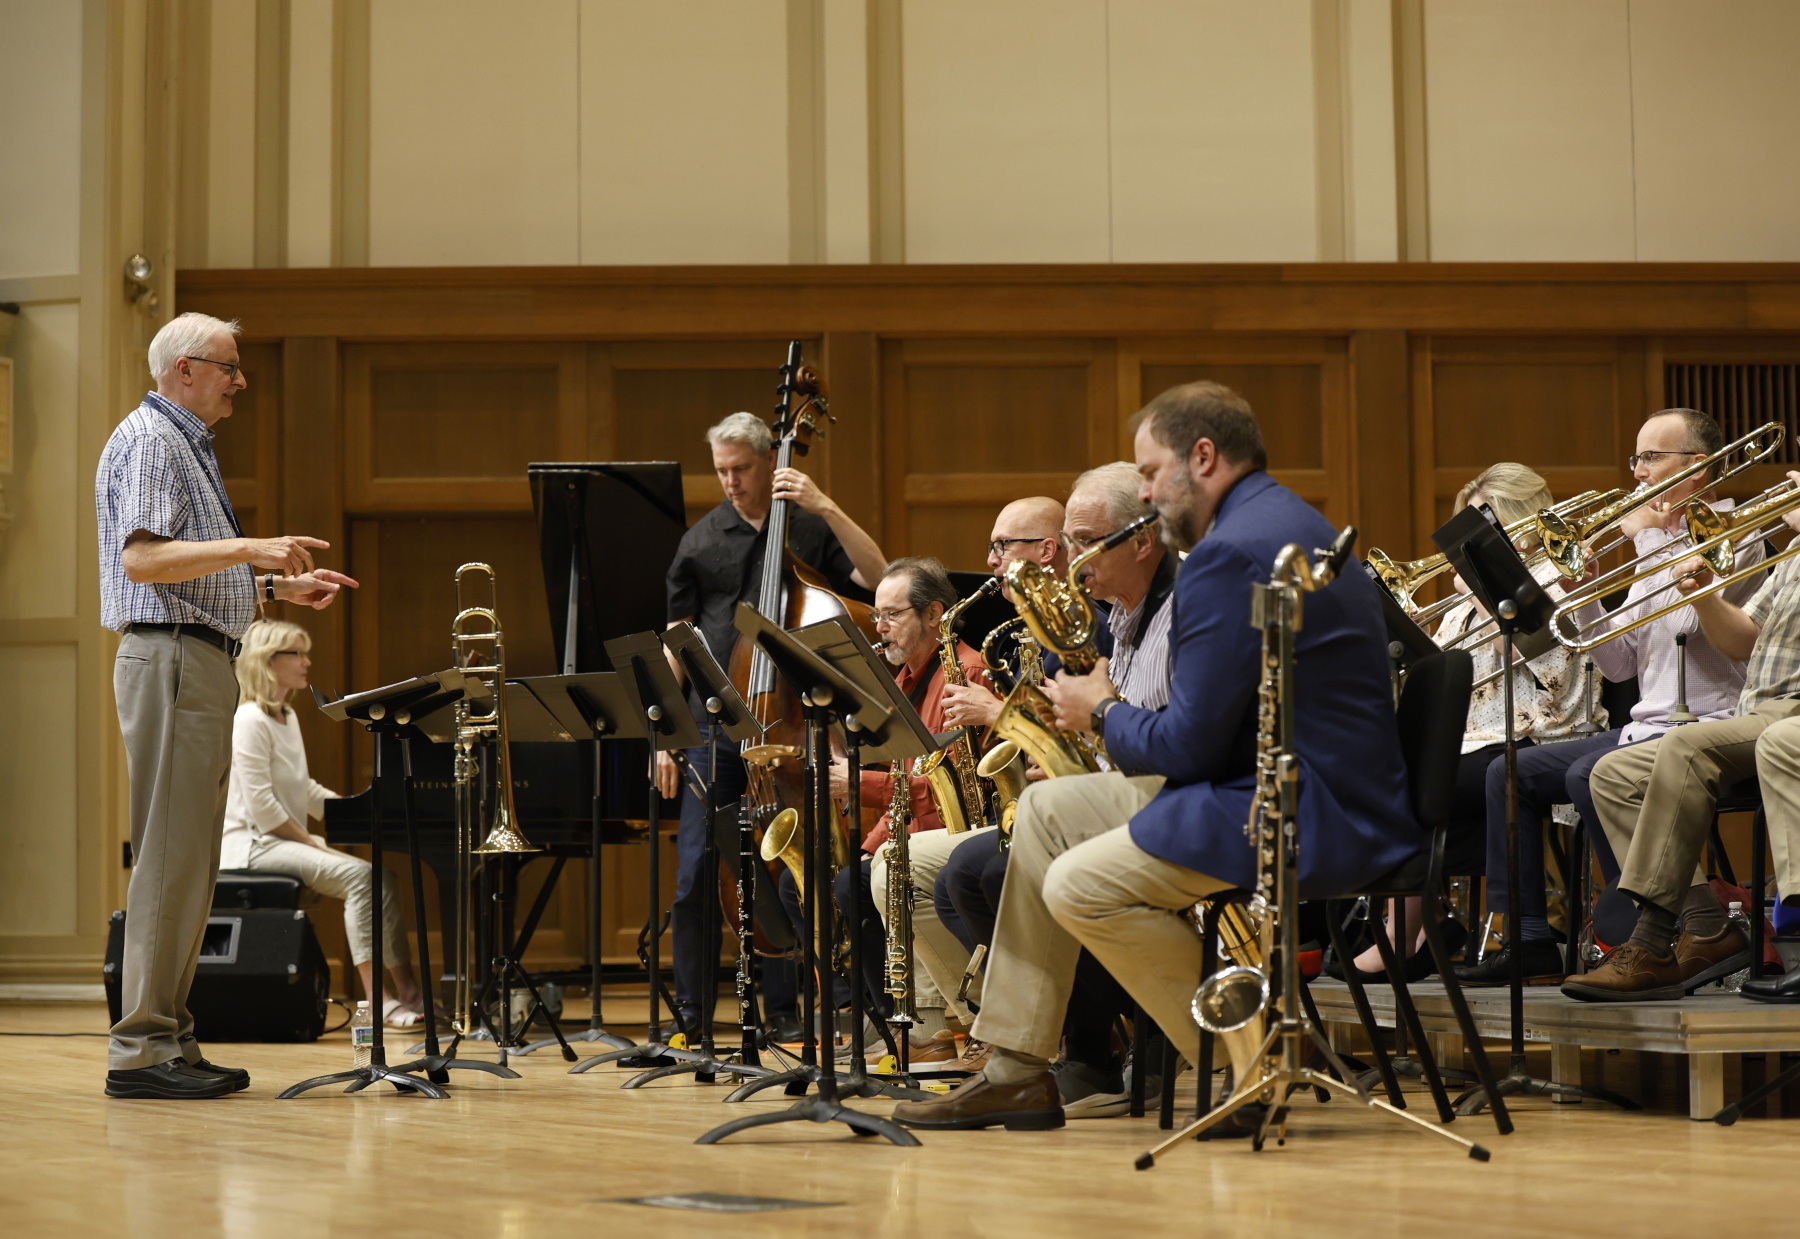 Kurt Dietrich directs the 17-member big band on the stage of Memorial Chapel.